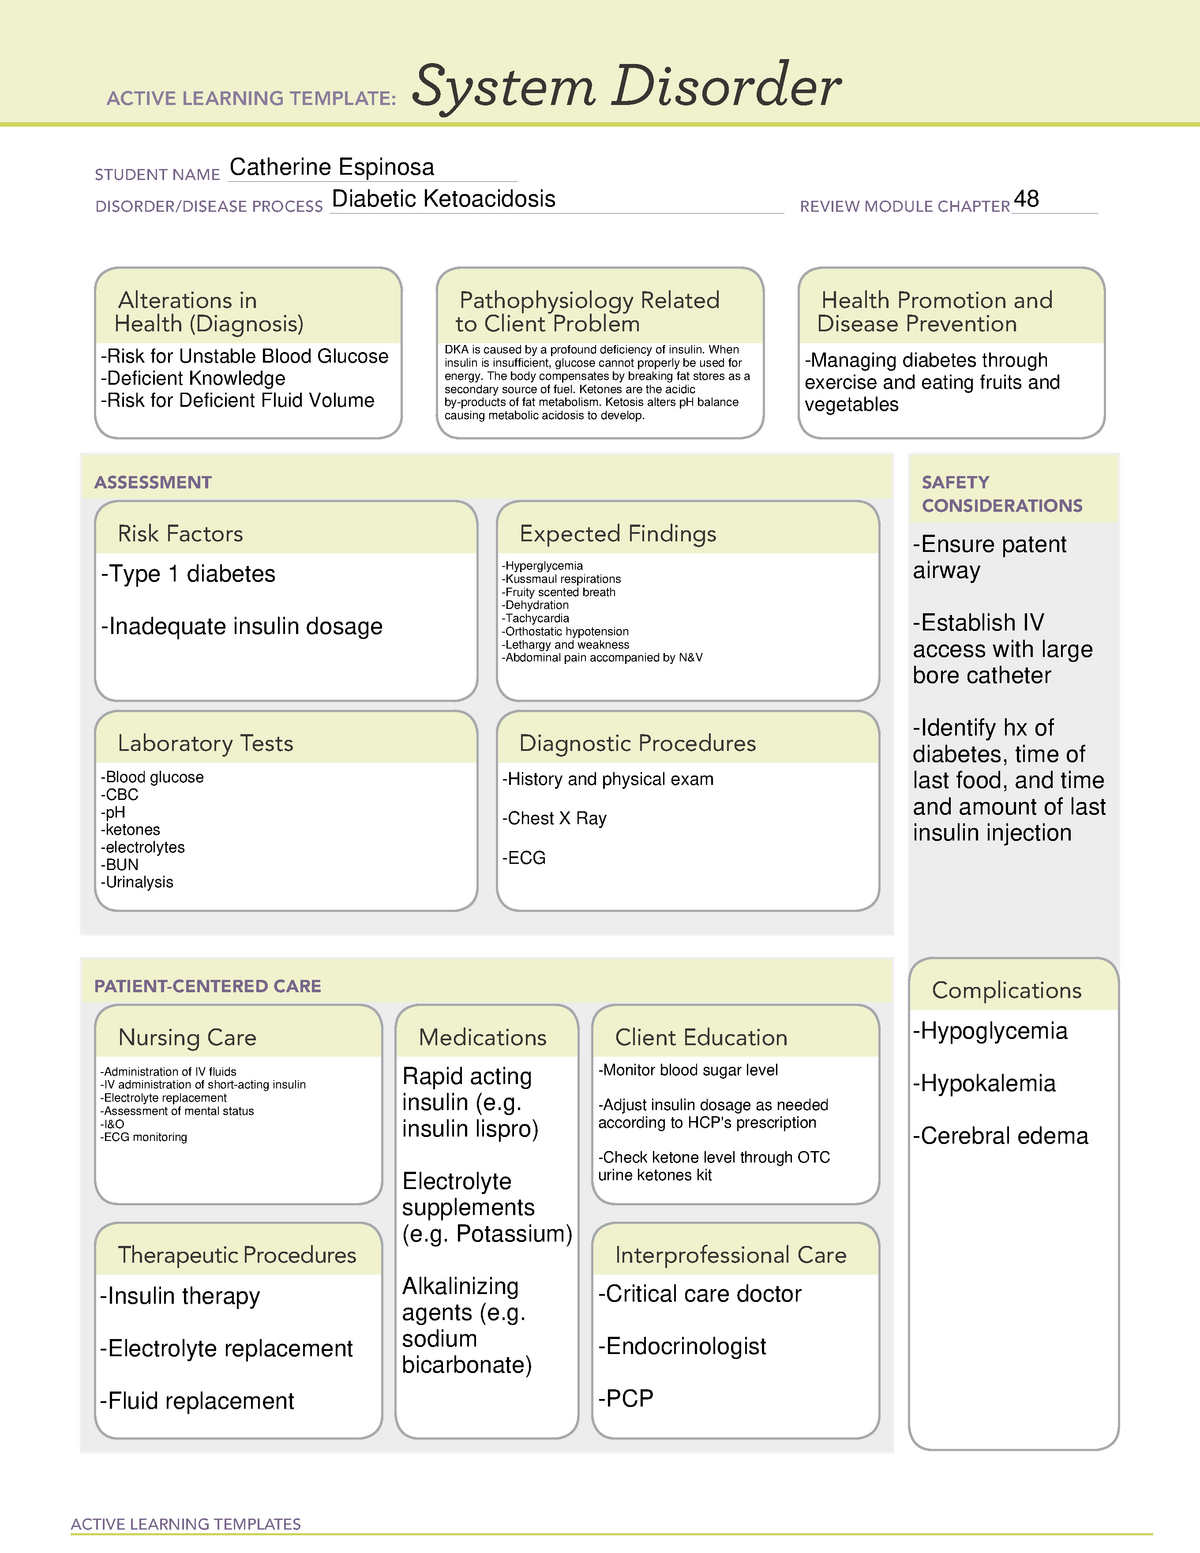 Diabetic Ketoacidosis (DKA) System Disorder ACTIVE LEARNING TEMPLATES